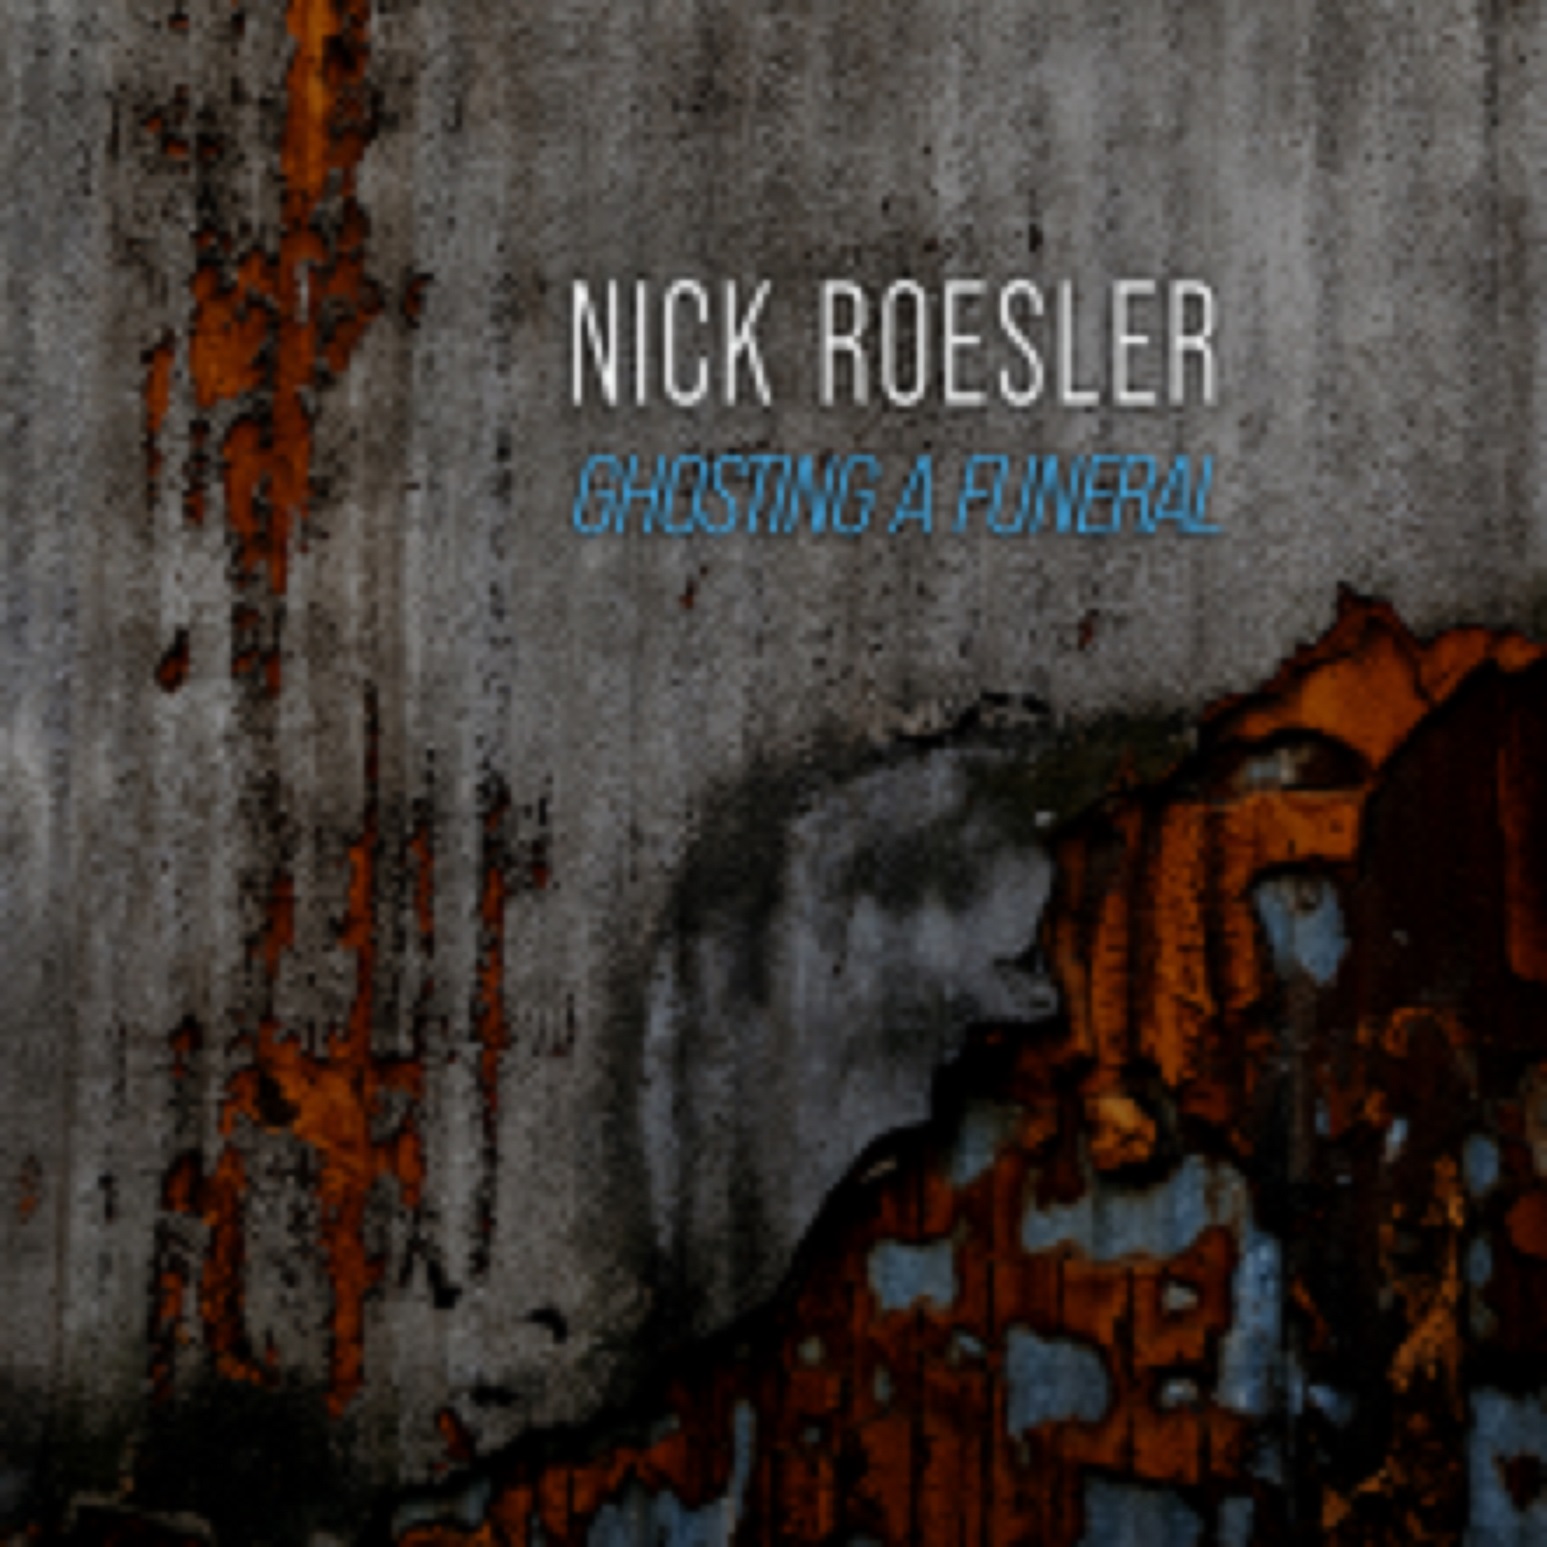 Nick Roesler Debuts Album featuring Dave King (The Bad Plus)